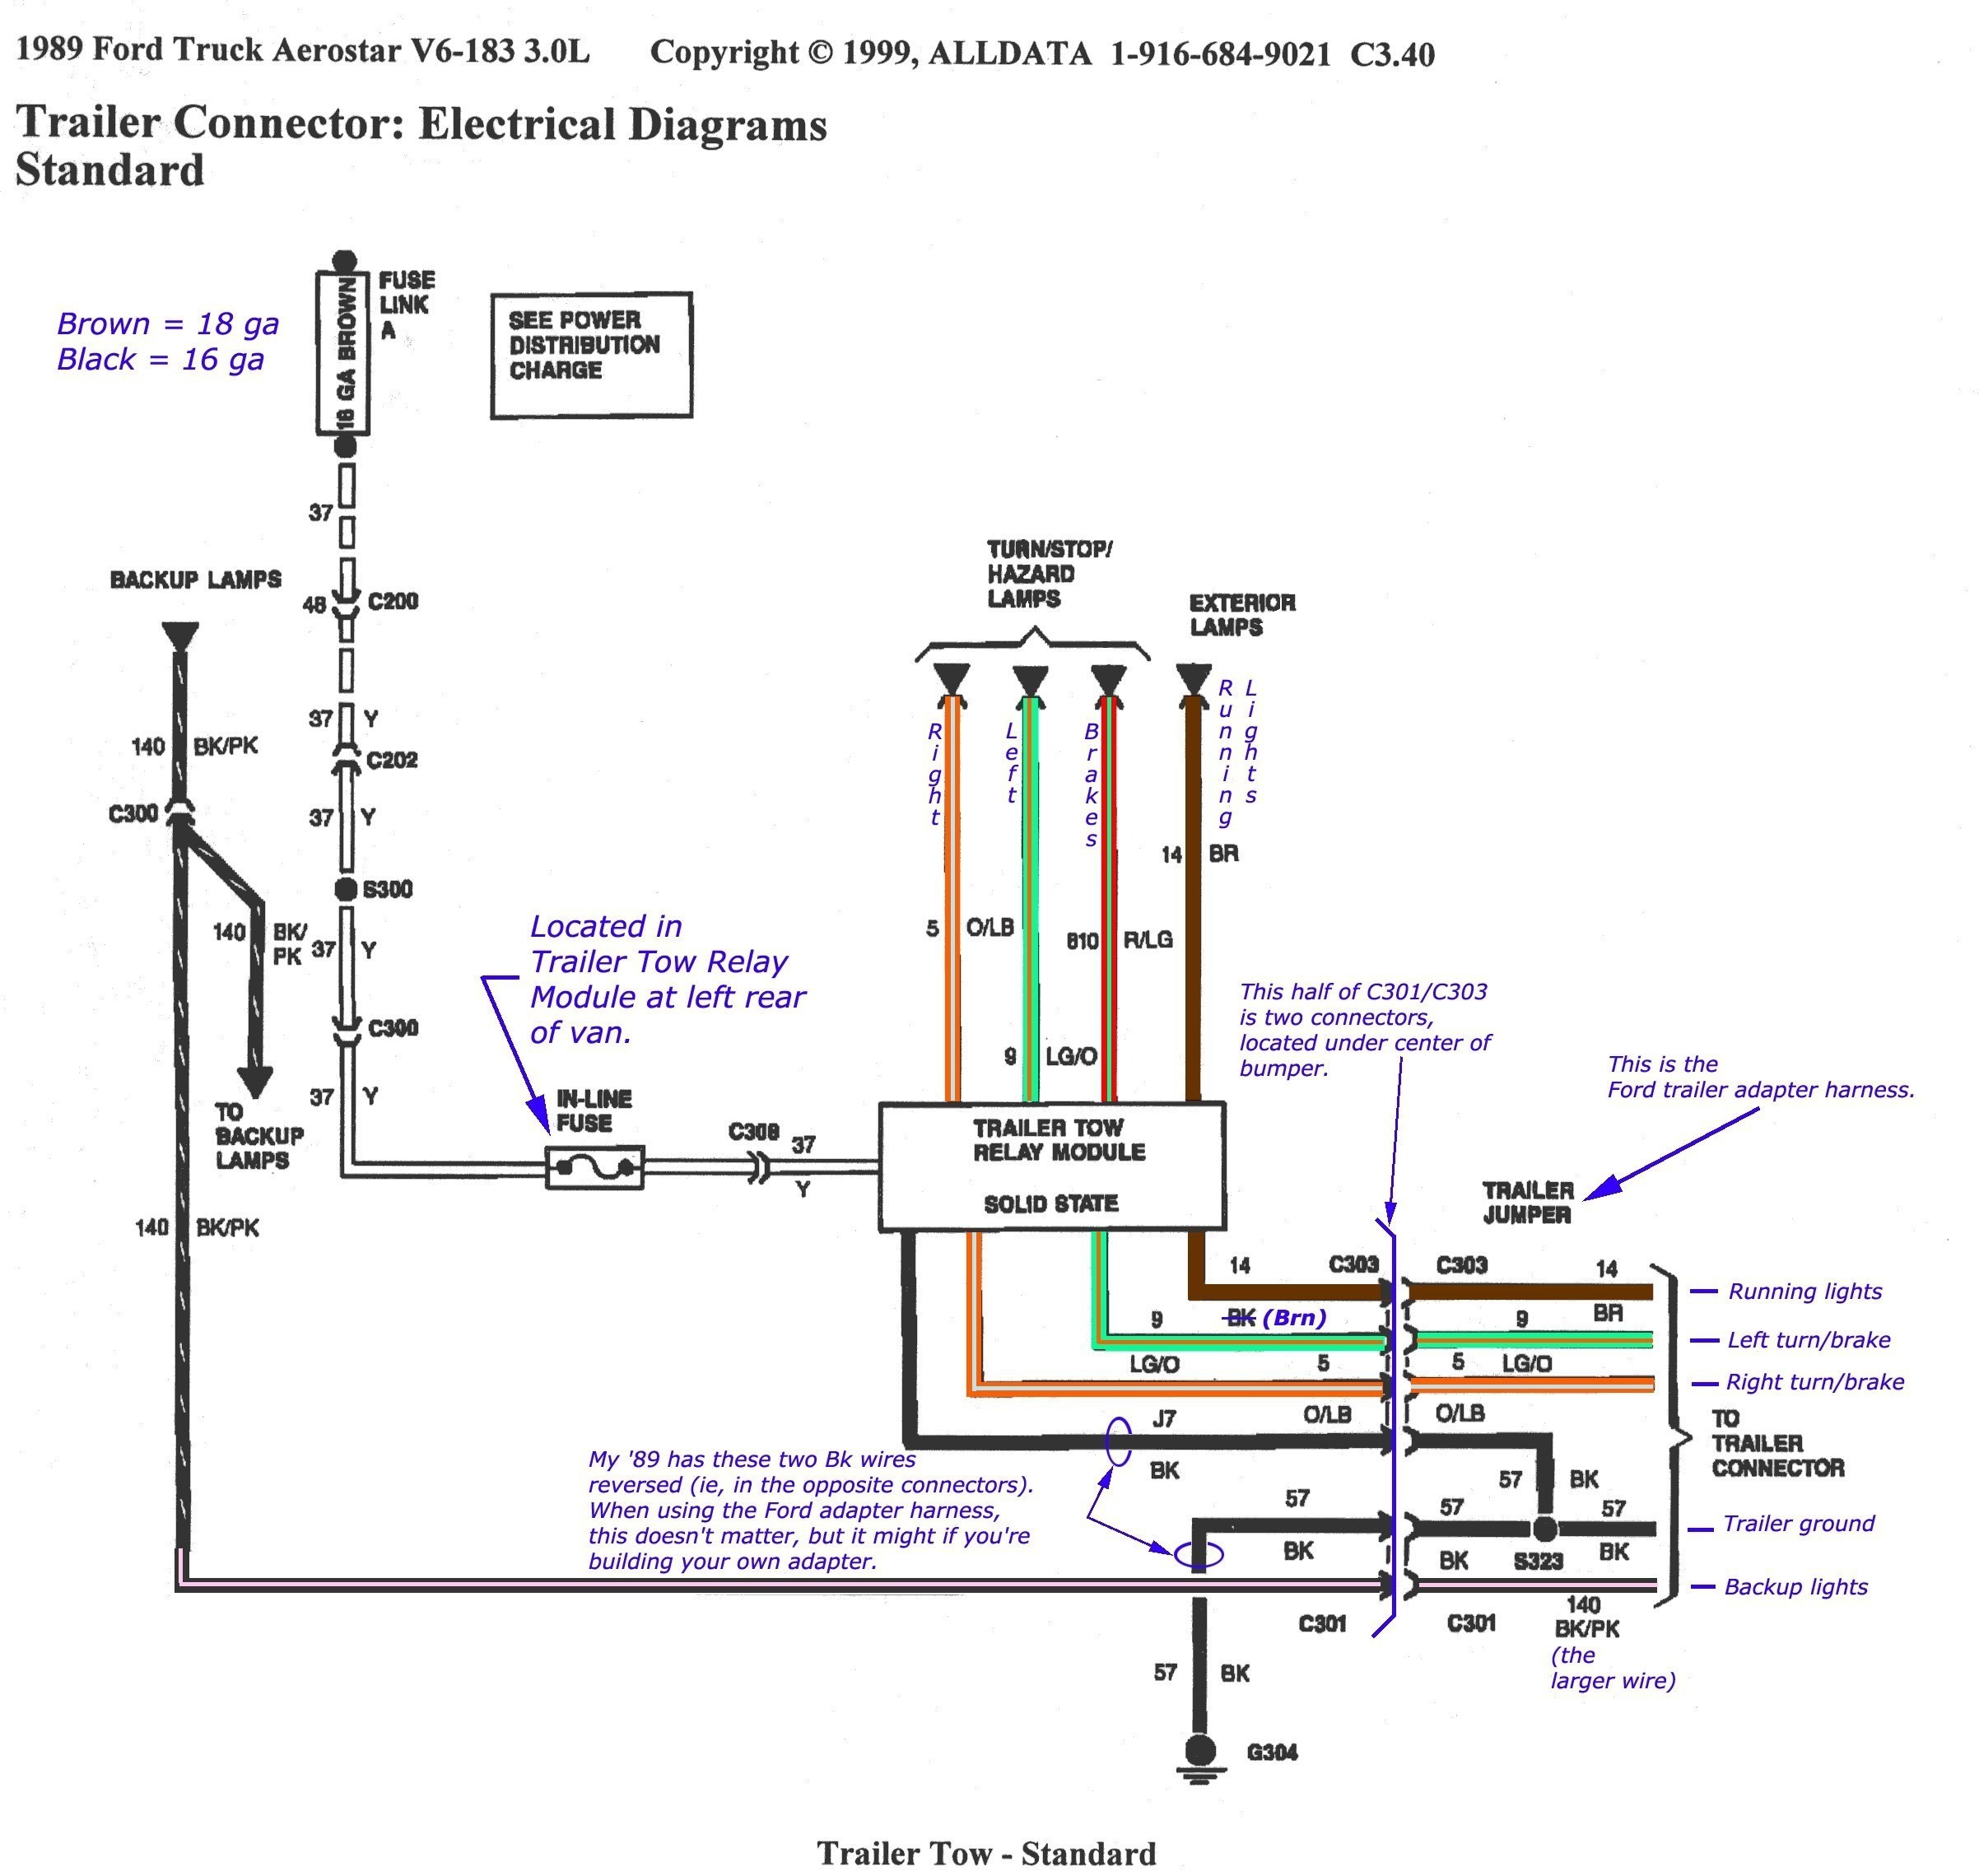 Wiring Diagrams for Utility Trailer Best Utility Trailer Wiring Diagram Best Best Wiring Diagram Od Rv